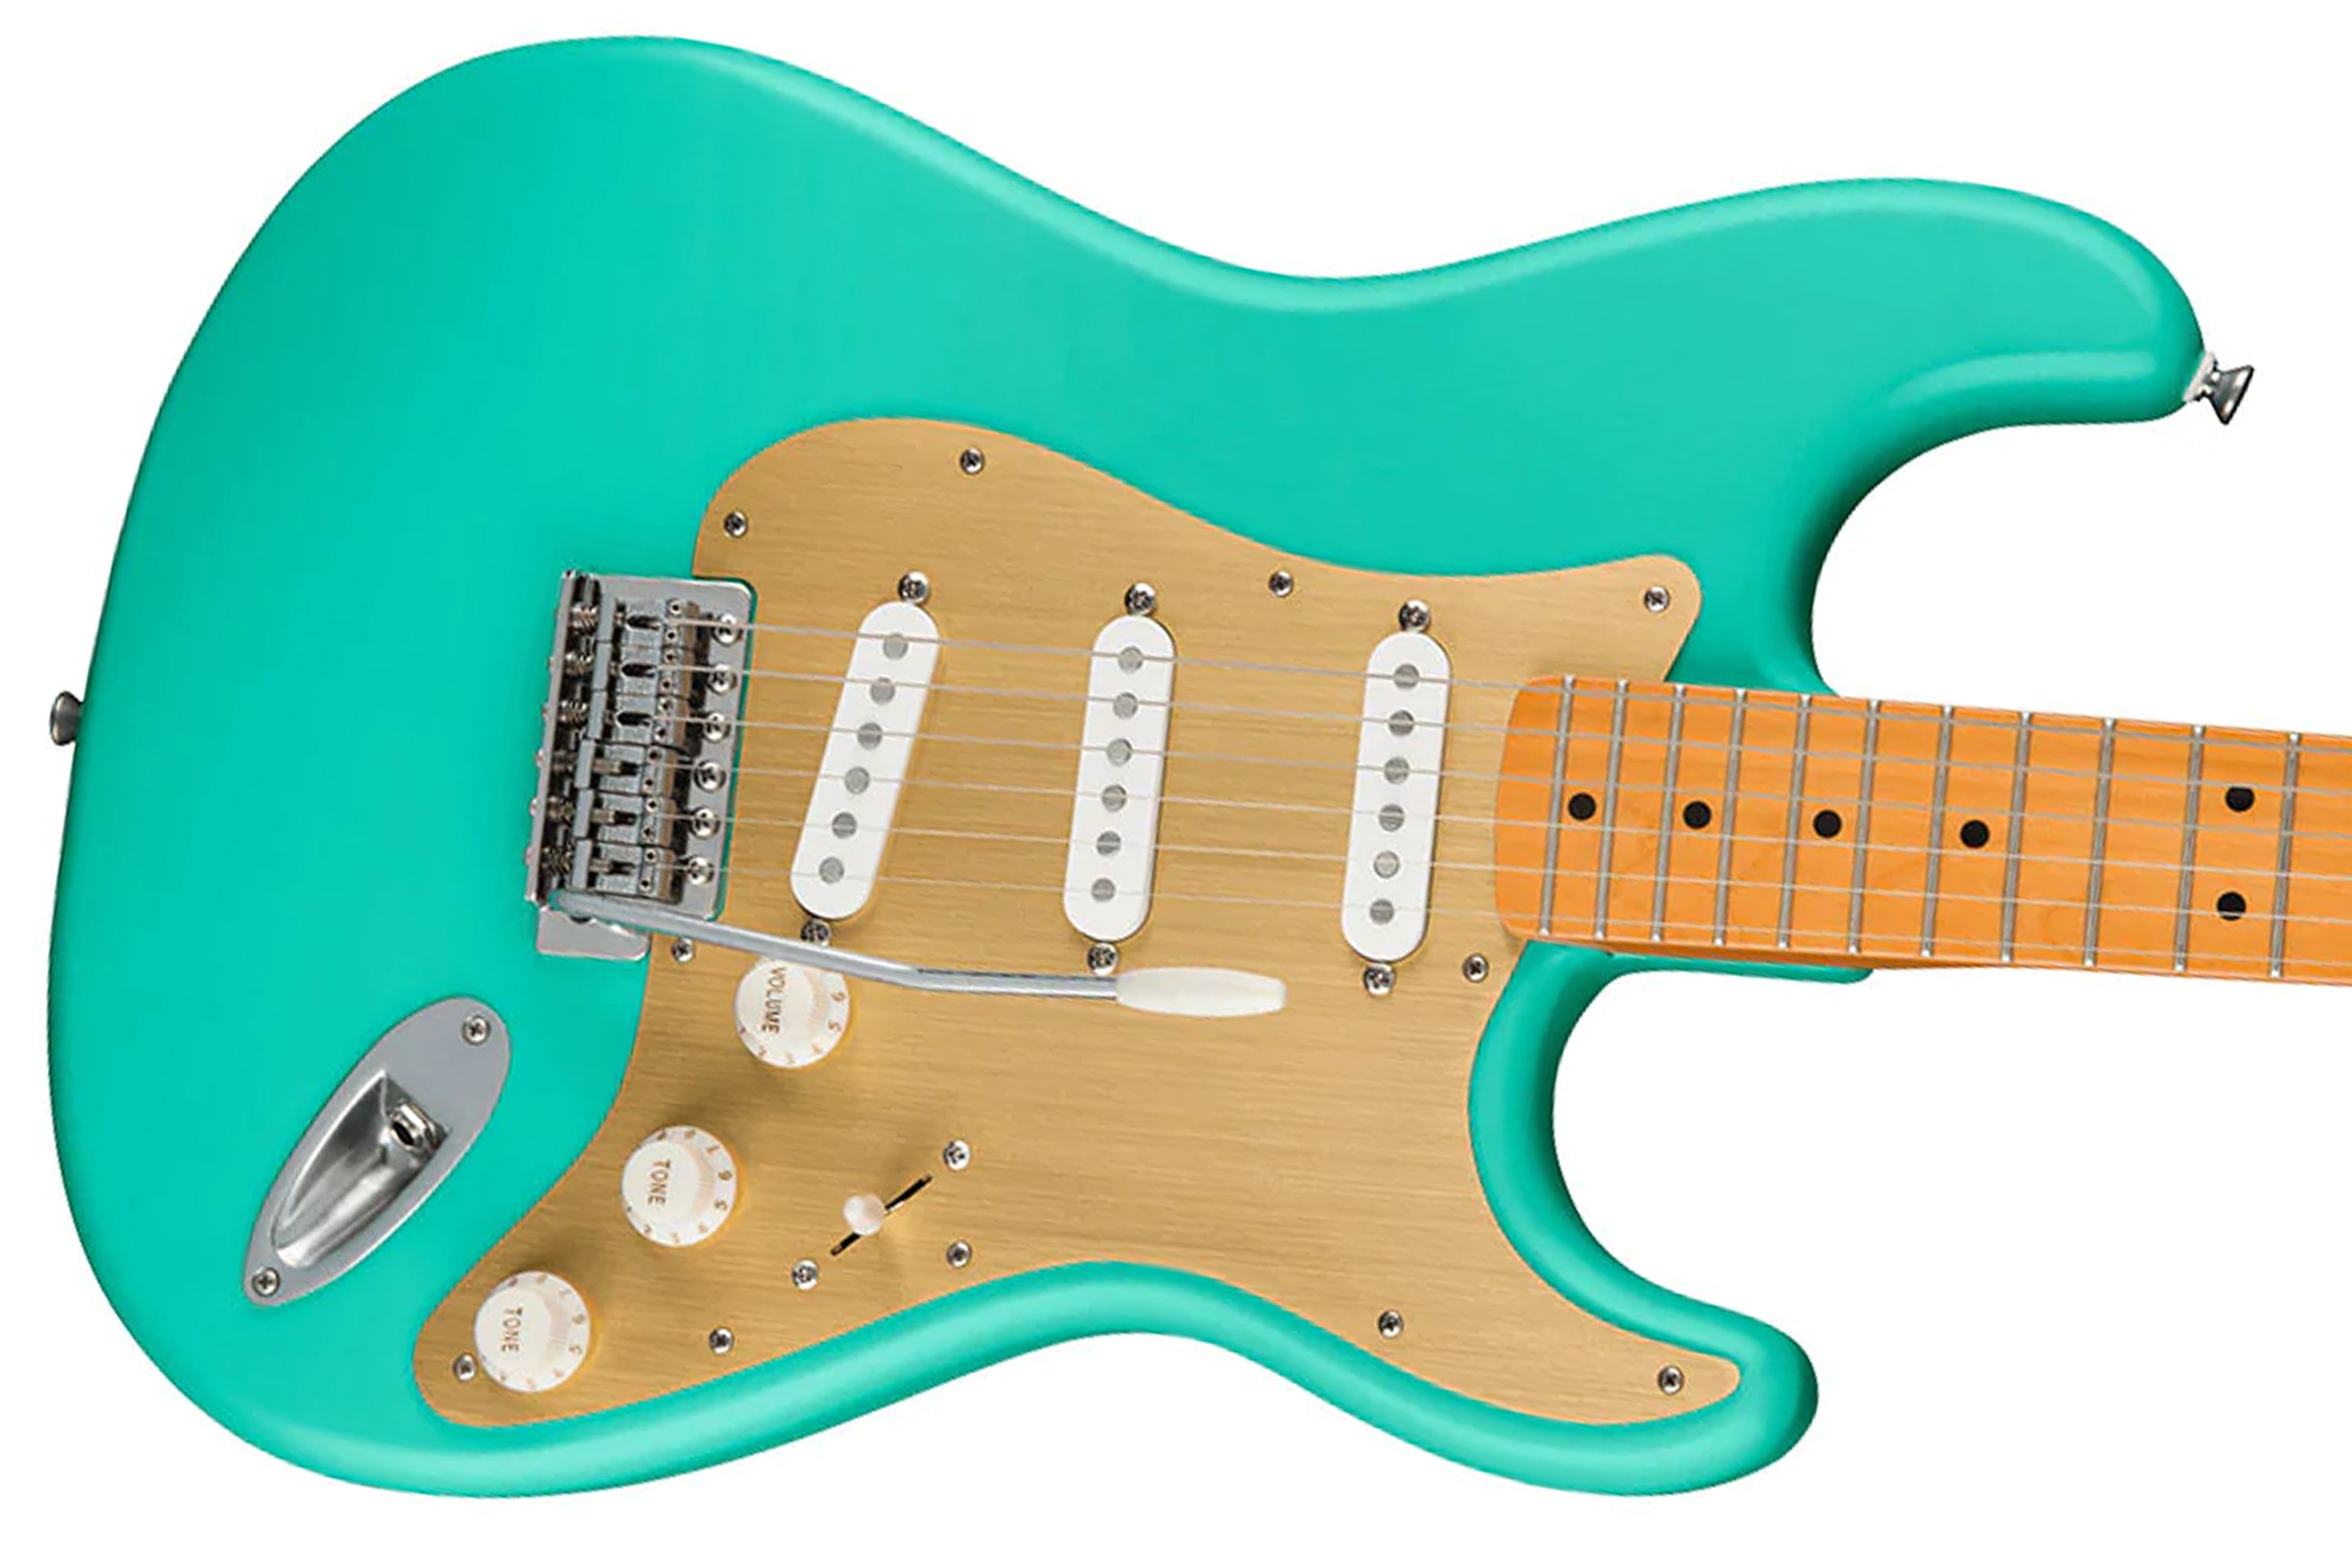 Squire By Fender 40th Anniversary Stratocaster Guitar Vintage Edition - Satin Seafoam Green